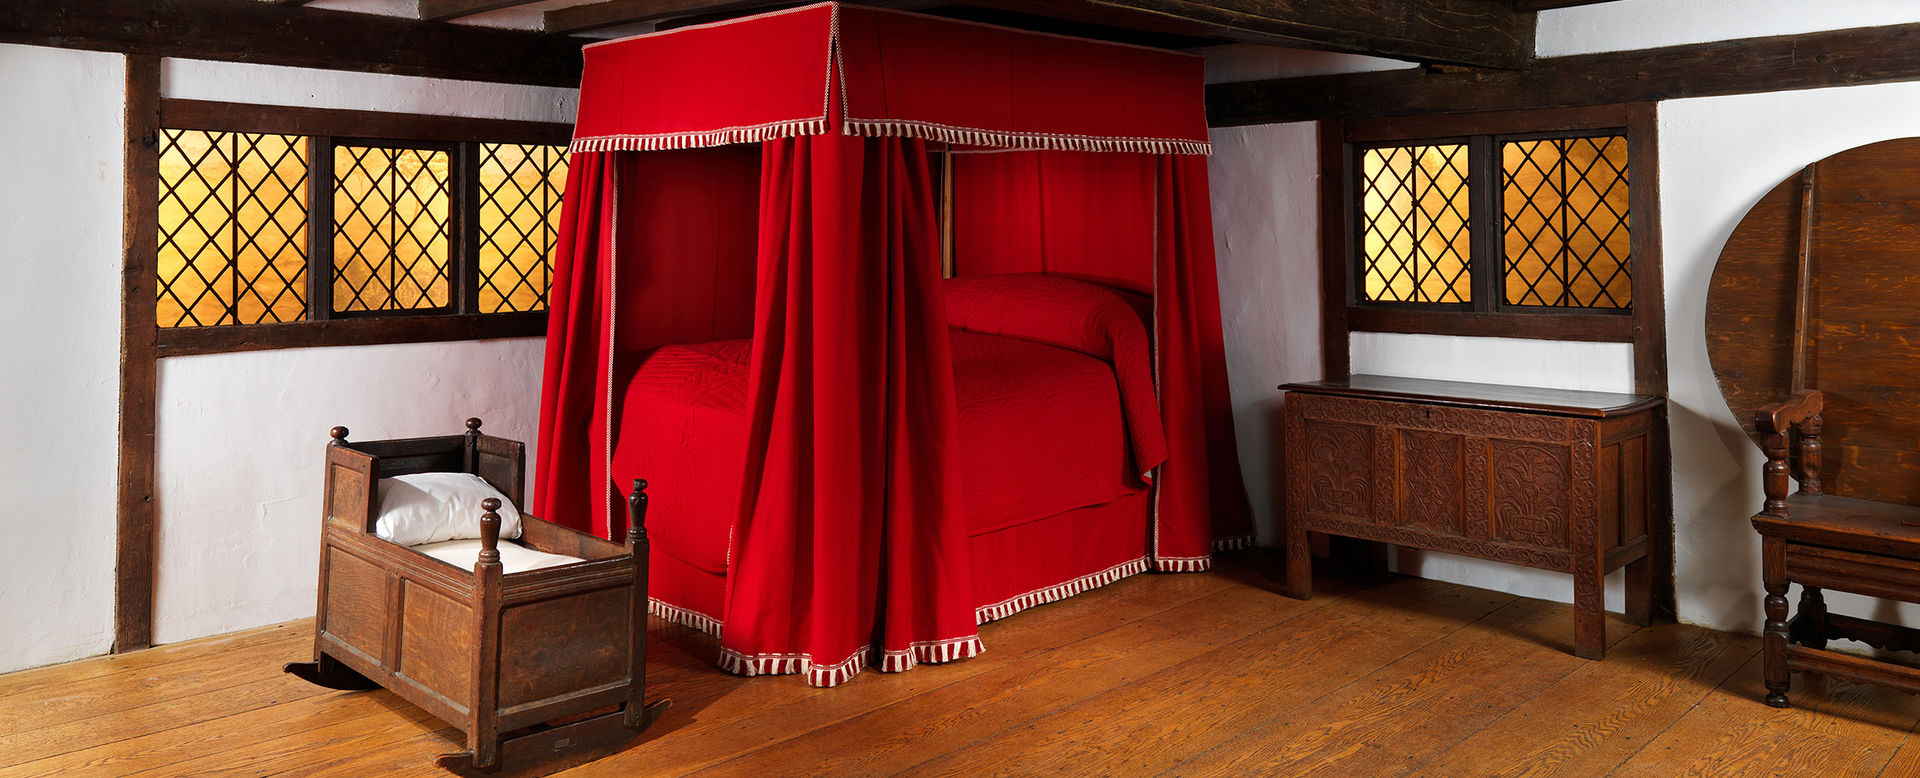 An interior image of the Hart Room showing exposed oak timbers, small casement windows, and wooden furniture including a crib and a bedstead with red curtains